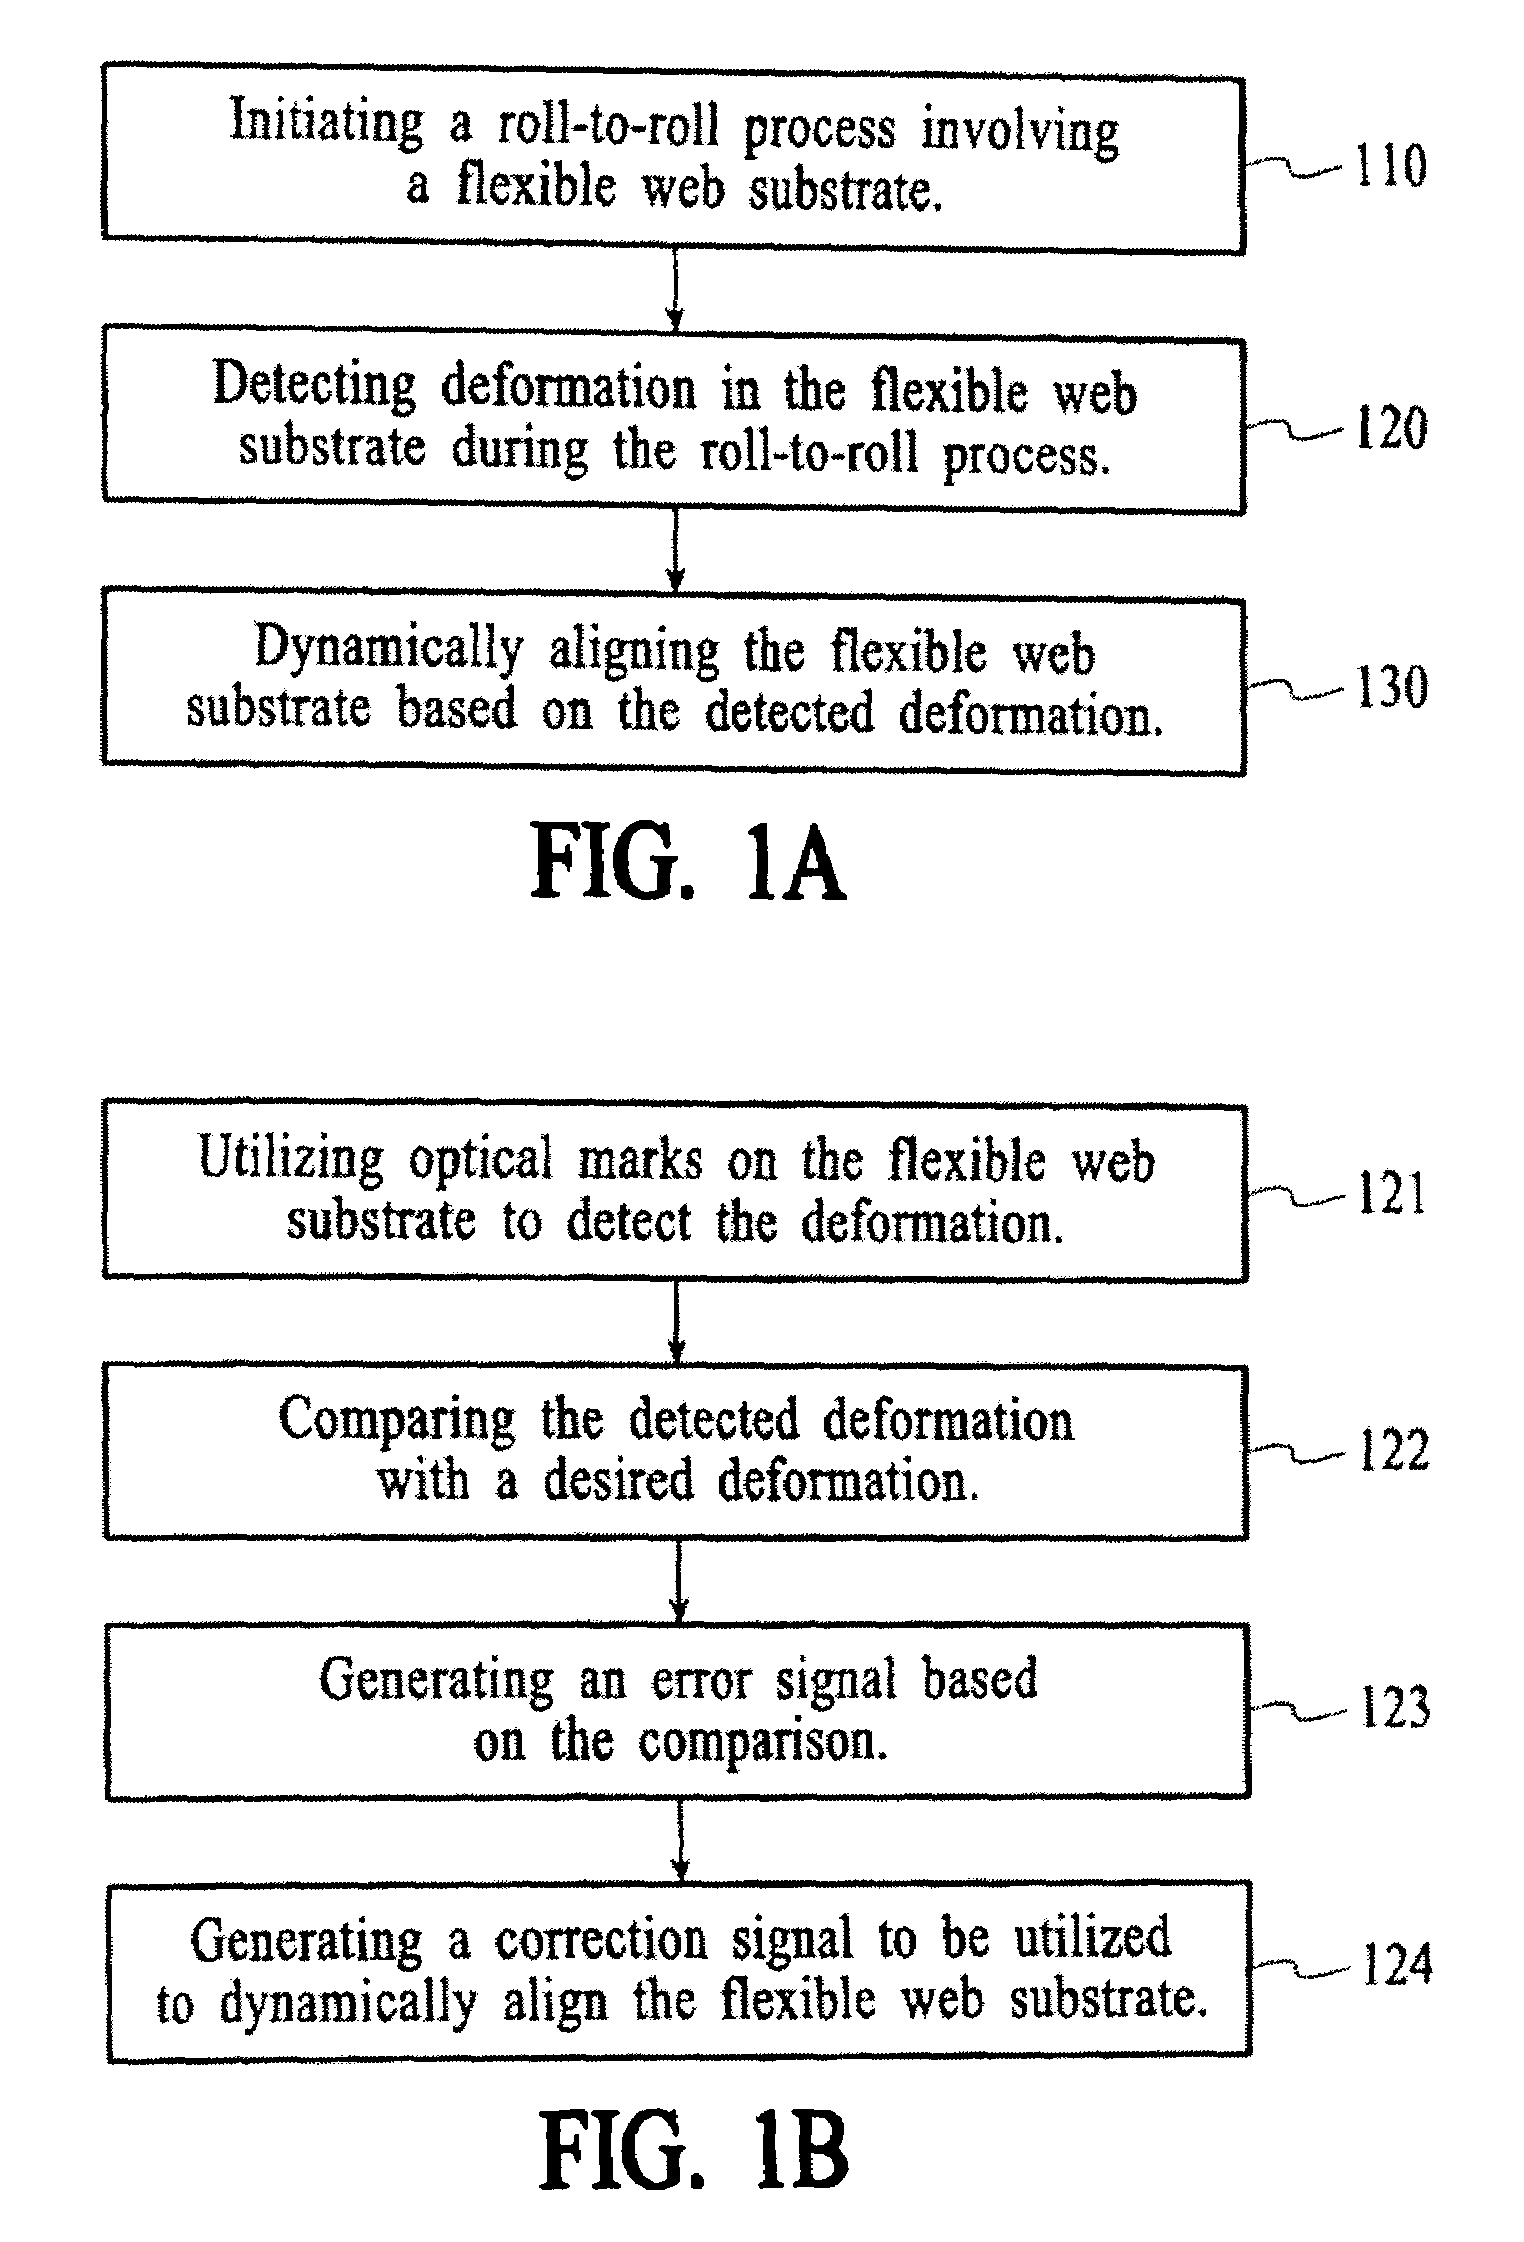 Method and system for correcting web deformation during a roll-to-roll process